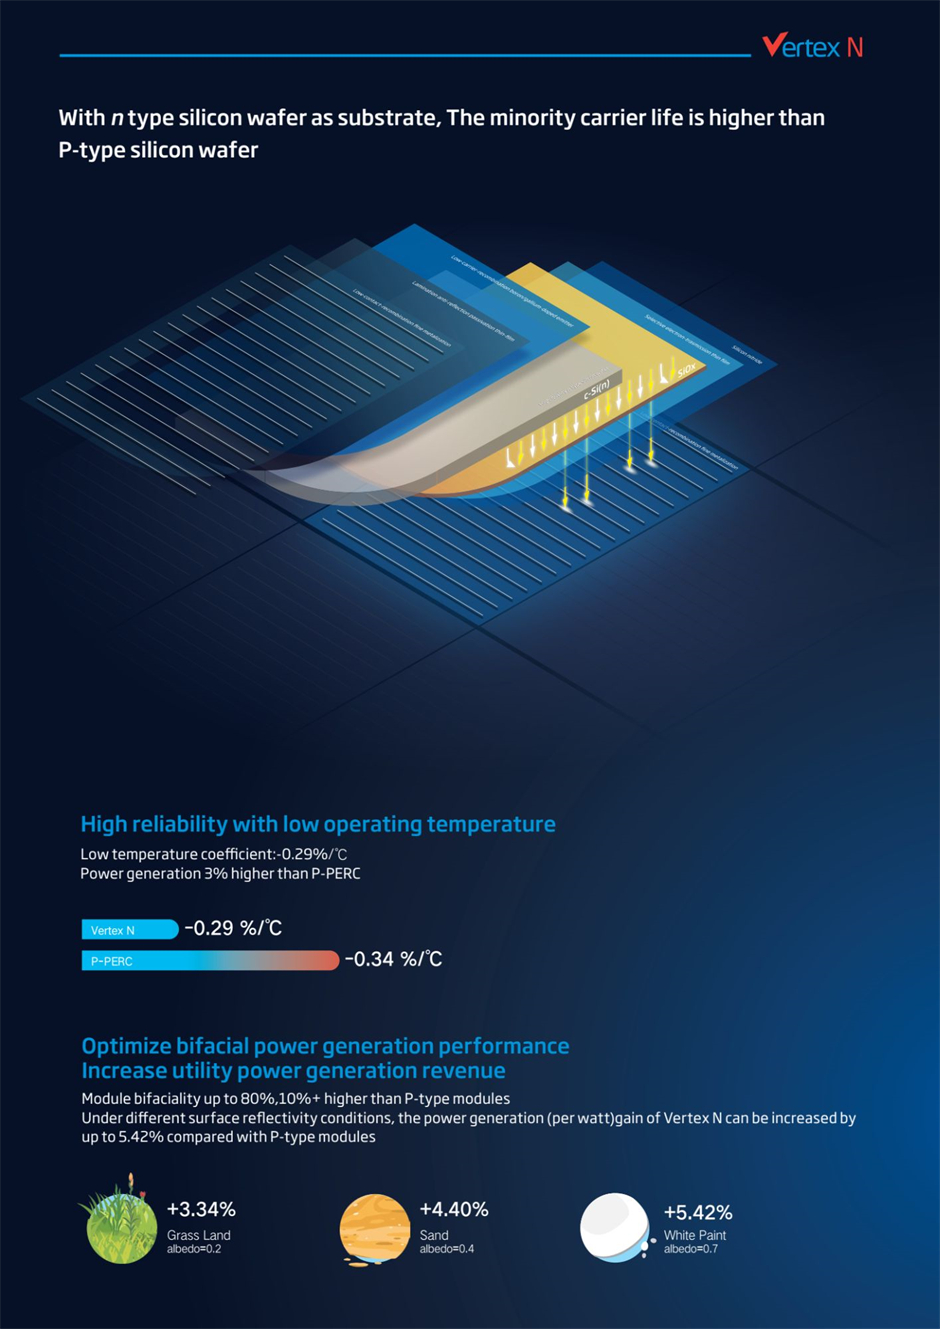 Trinasolar Vertex N 720W n-type i-TOPCon bifacial solar panel delivers high reliability with a low operating temperature, and optimizes bifacial power generation performance, increasing utility power generation revenue.
